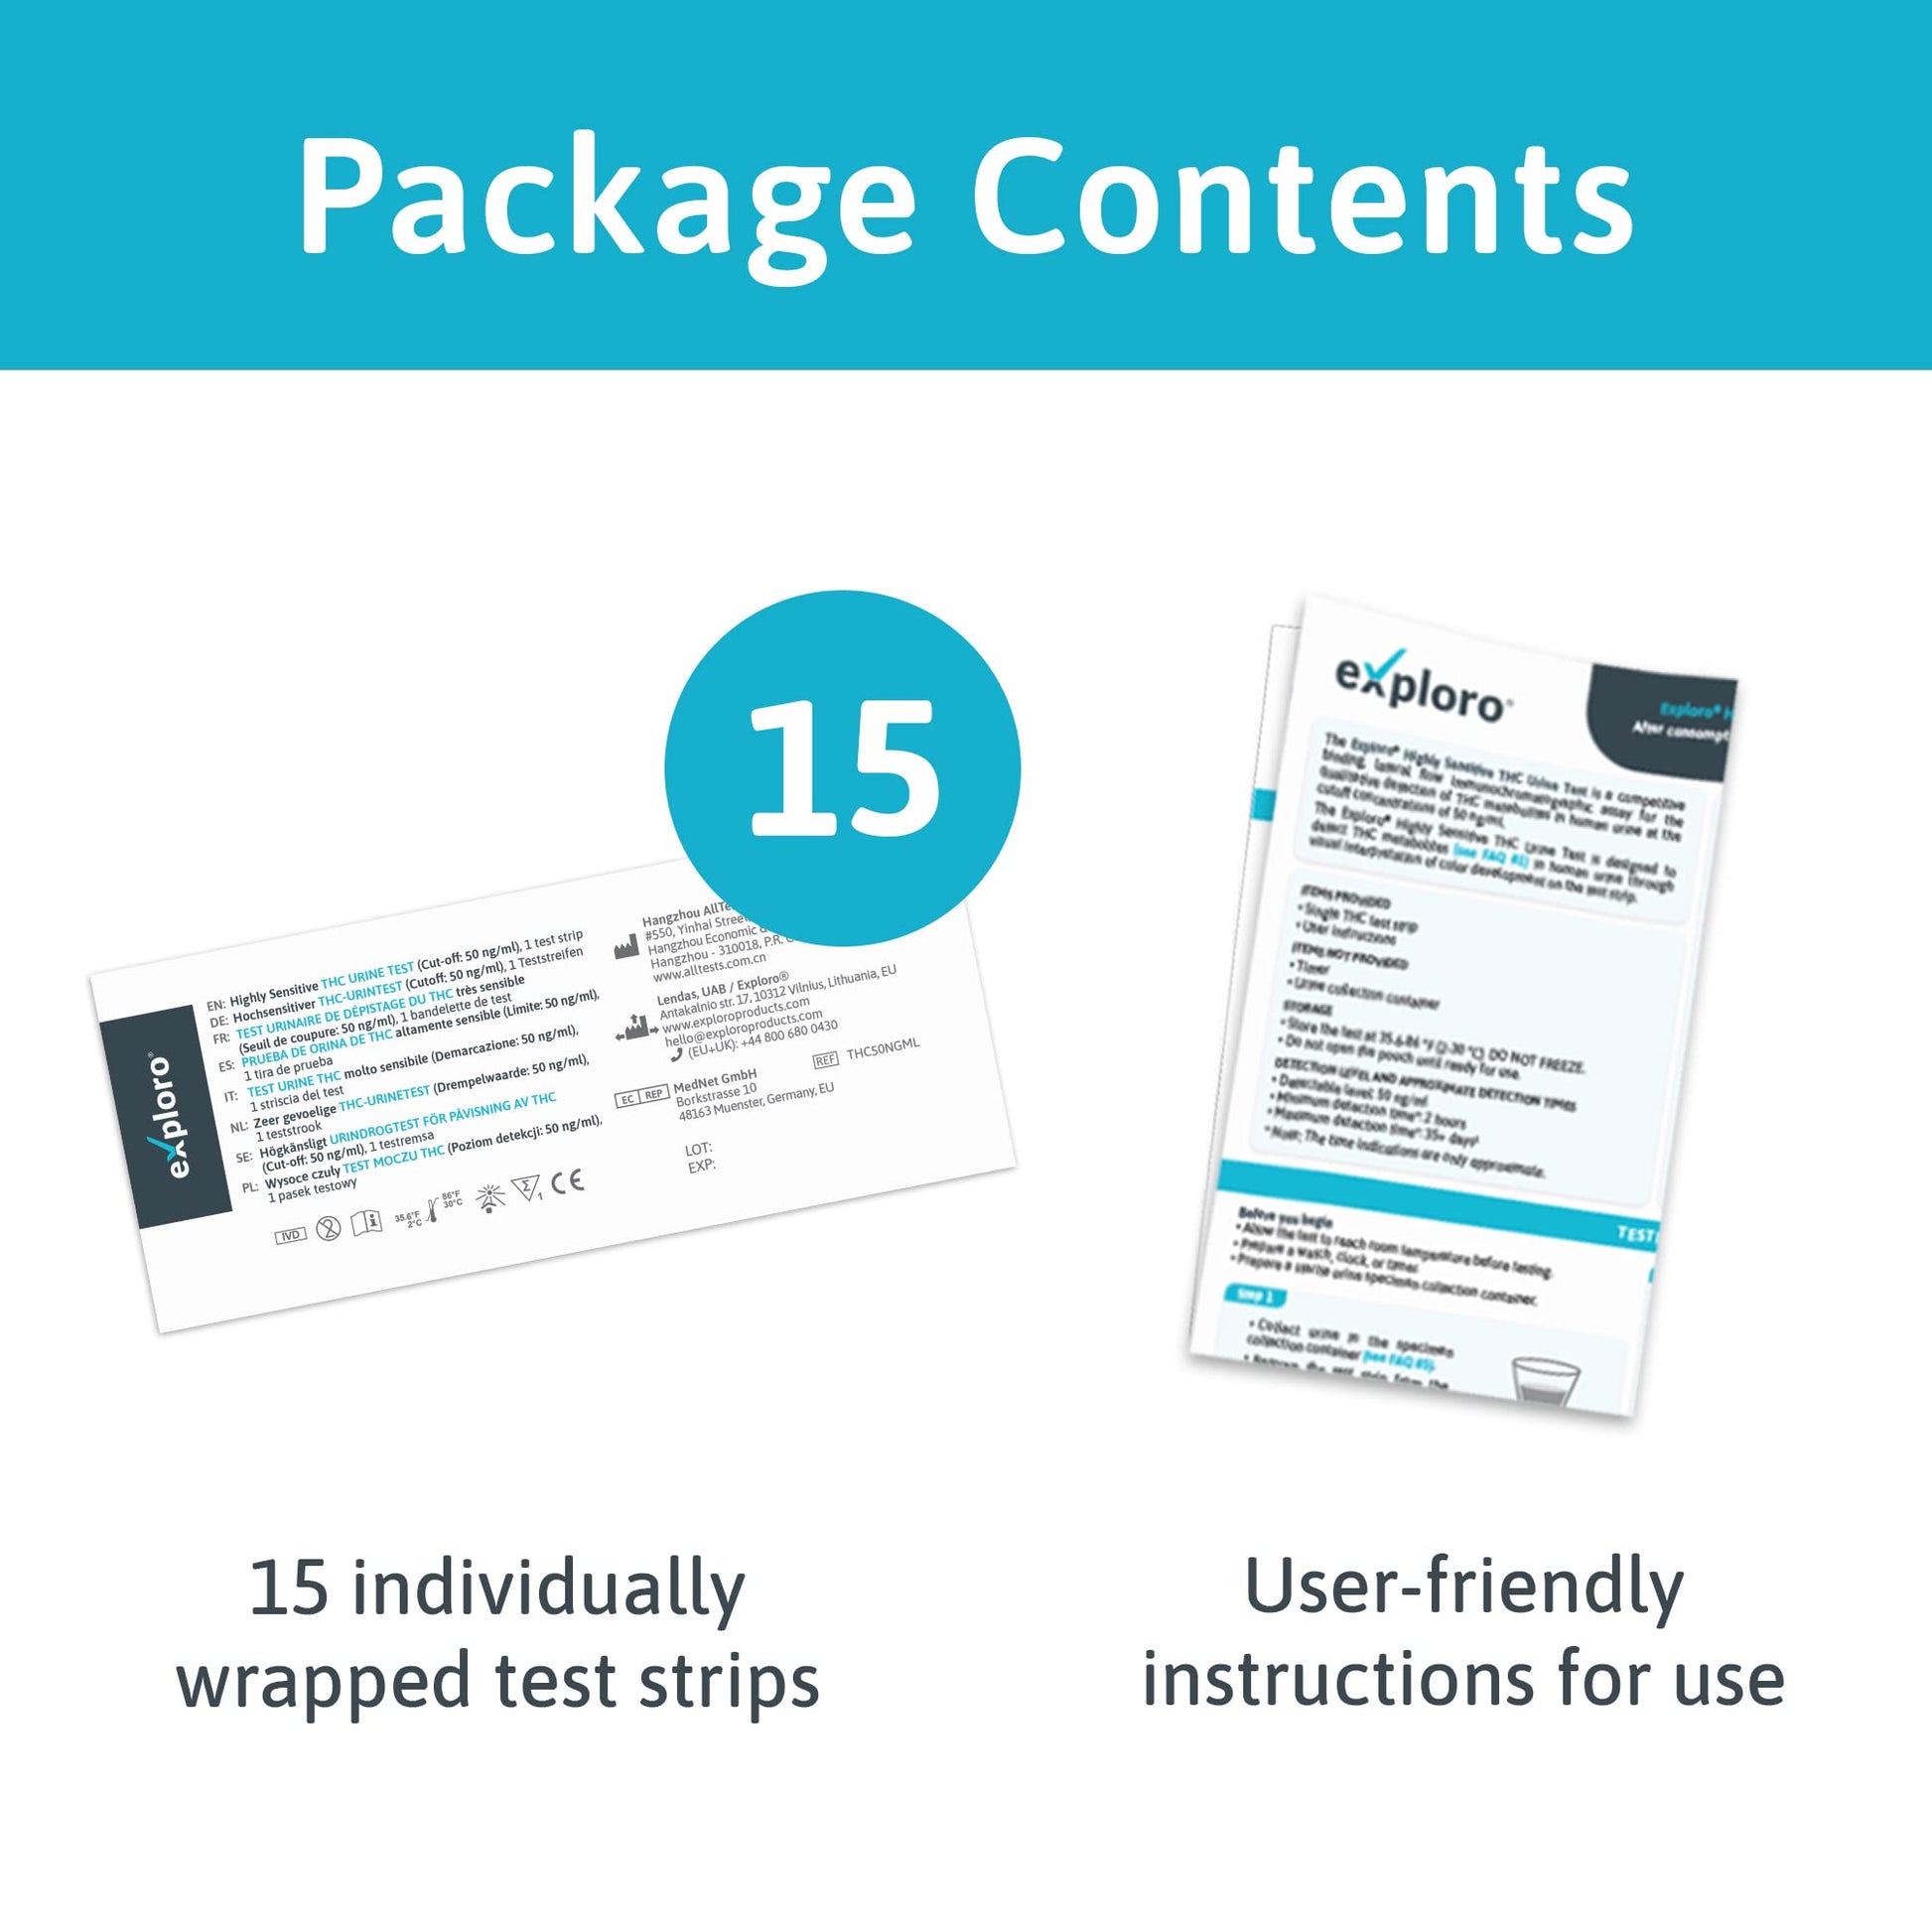 Package contains 15 wrapped test strips and instructions to follow